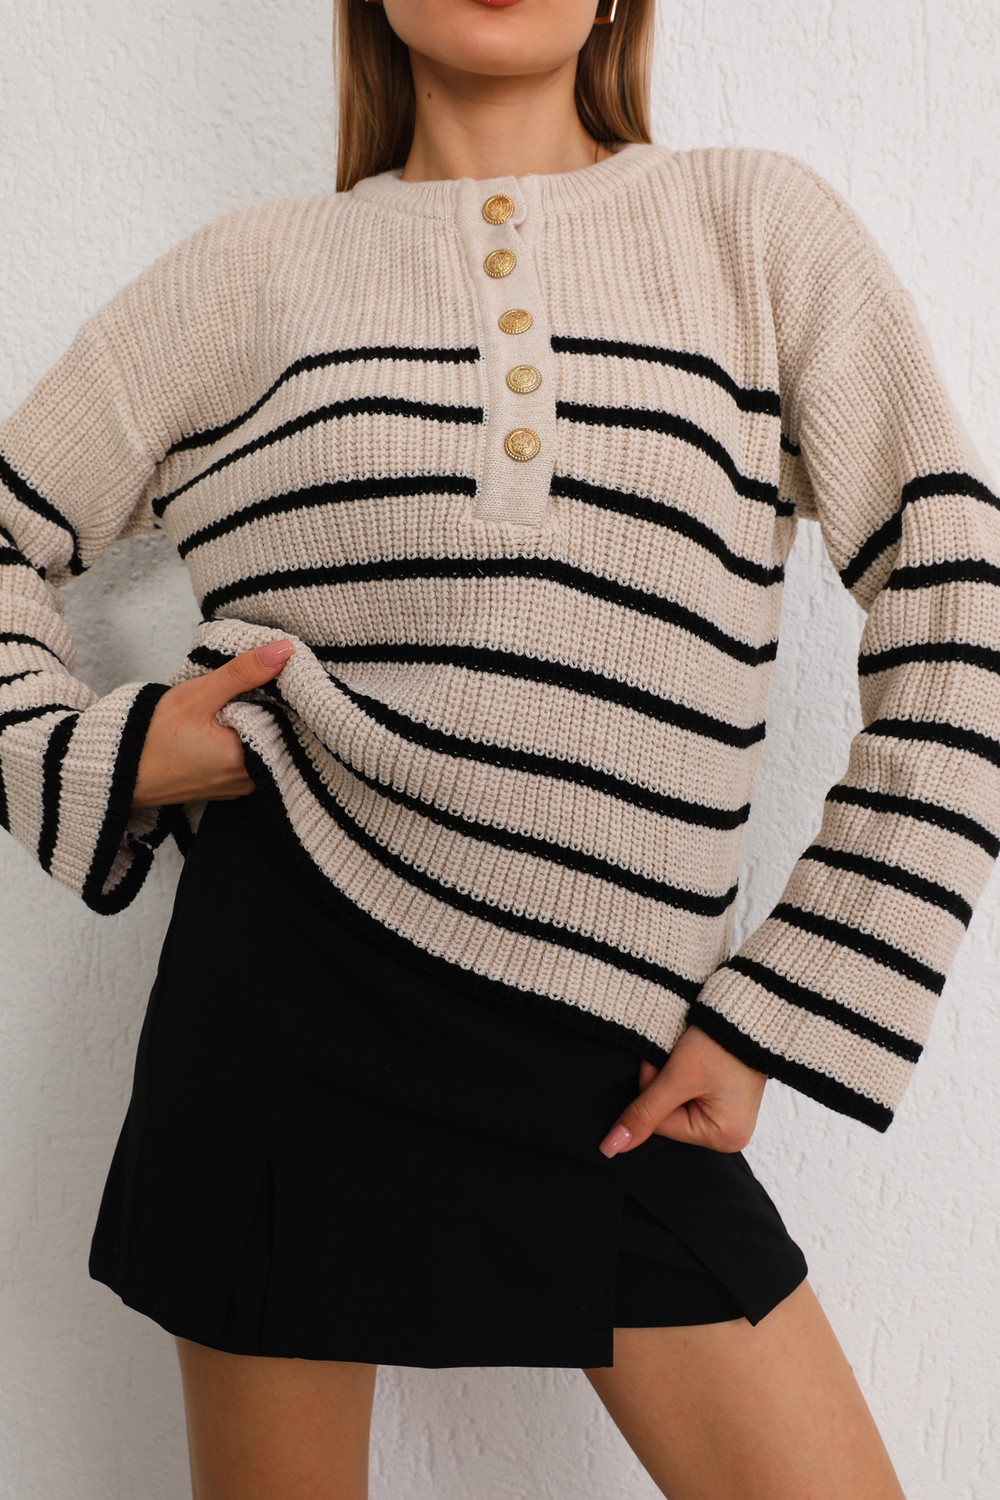 BİKELİFE Women's Beige Oversize Gold Buttoned Striped Thick Knitwear Sweater